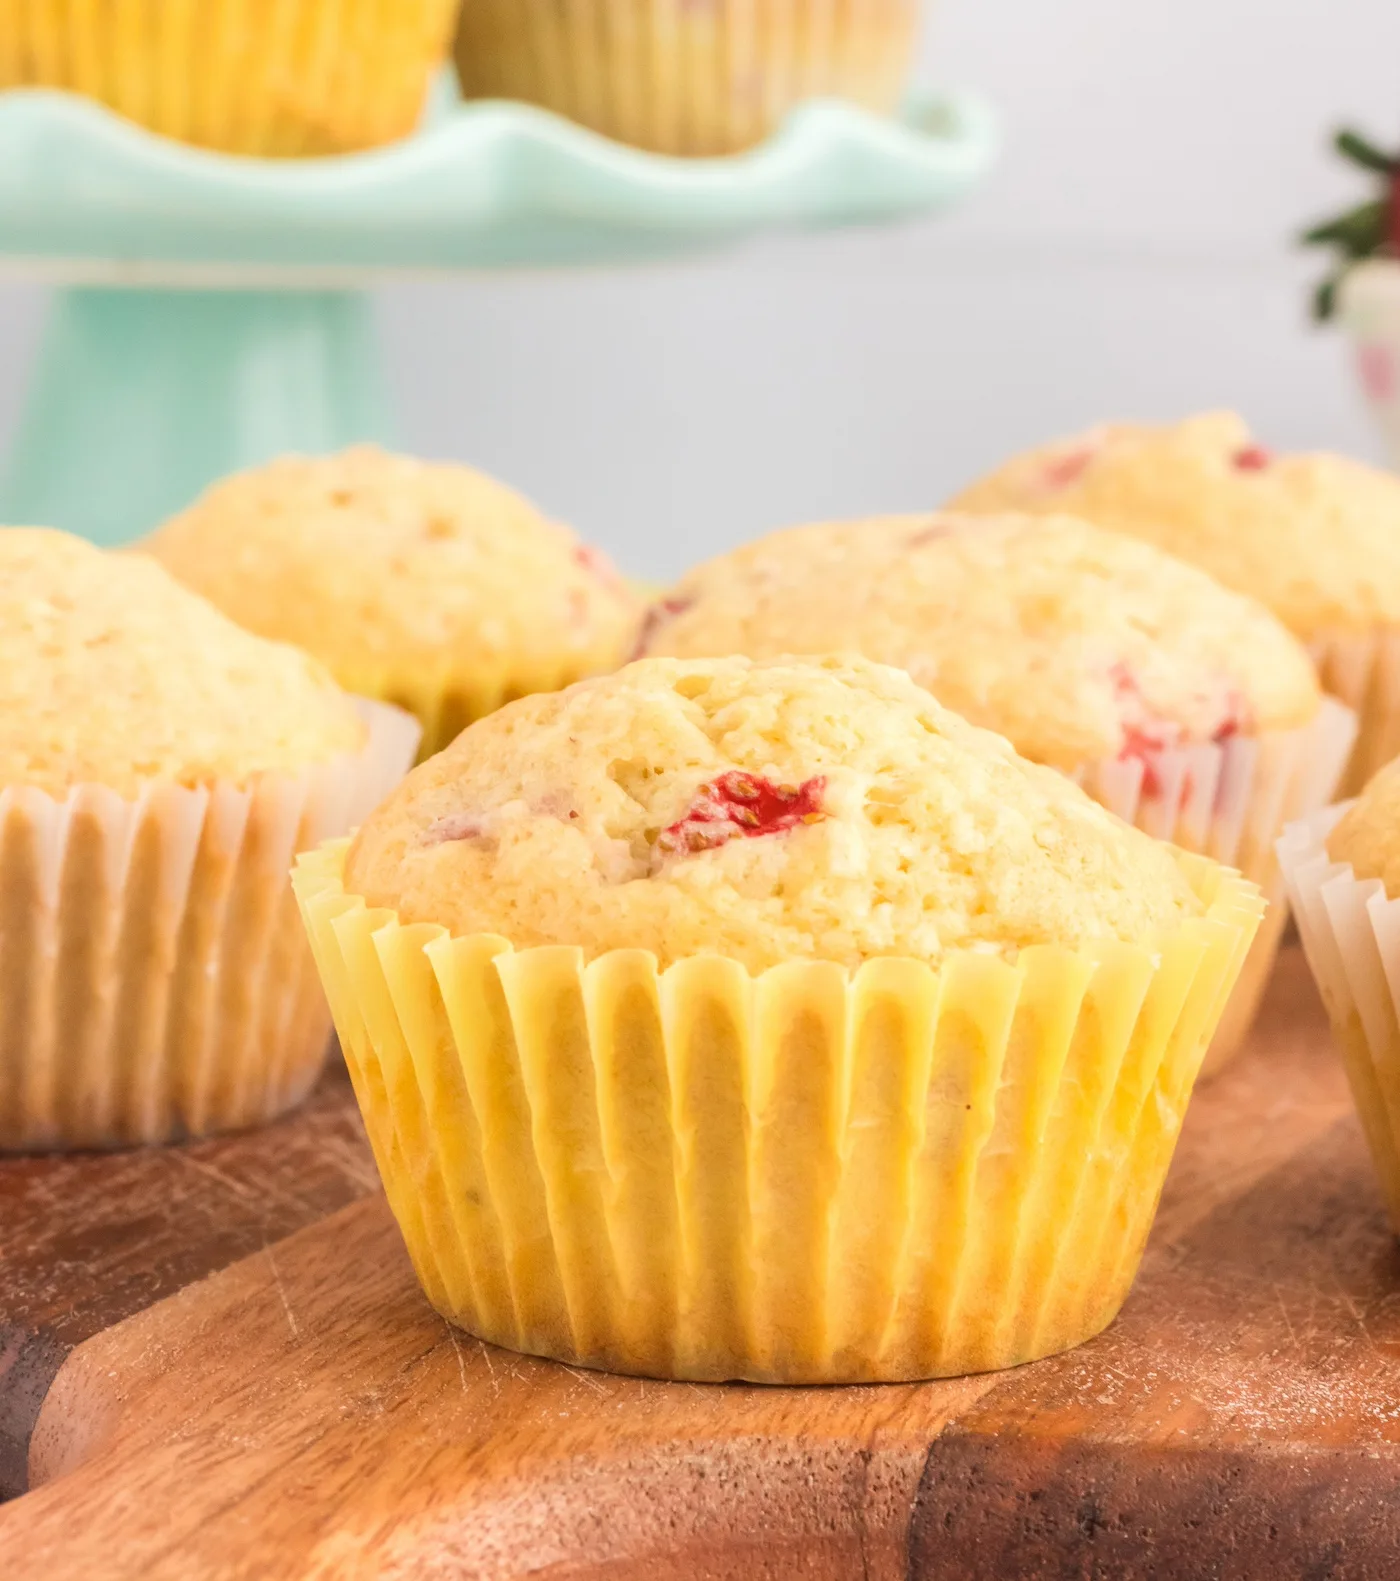 Remove muffins from the pan to cool